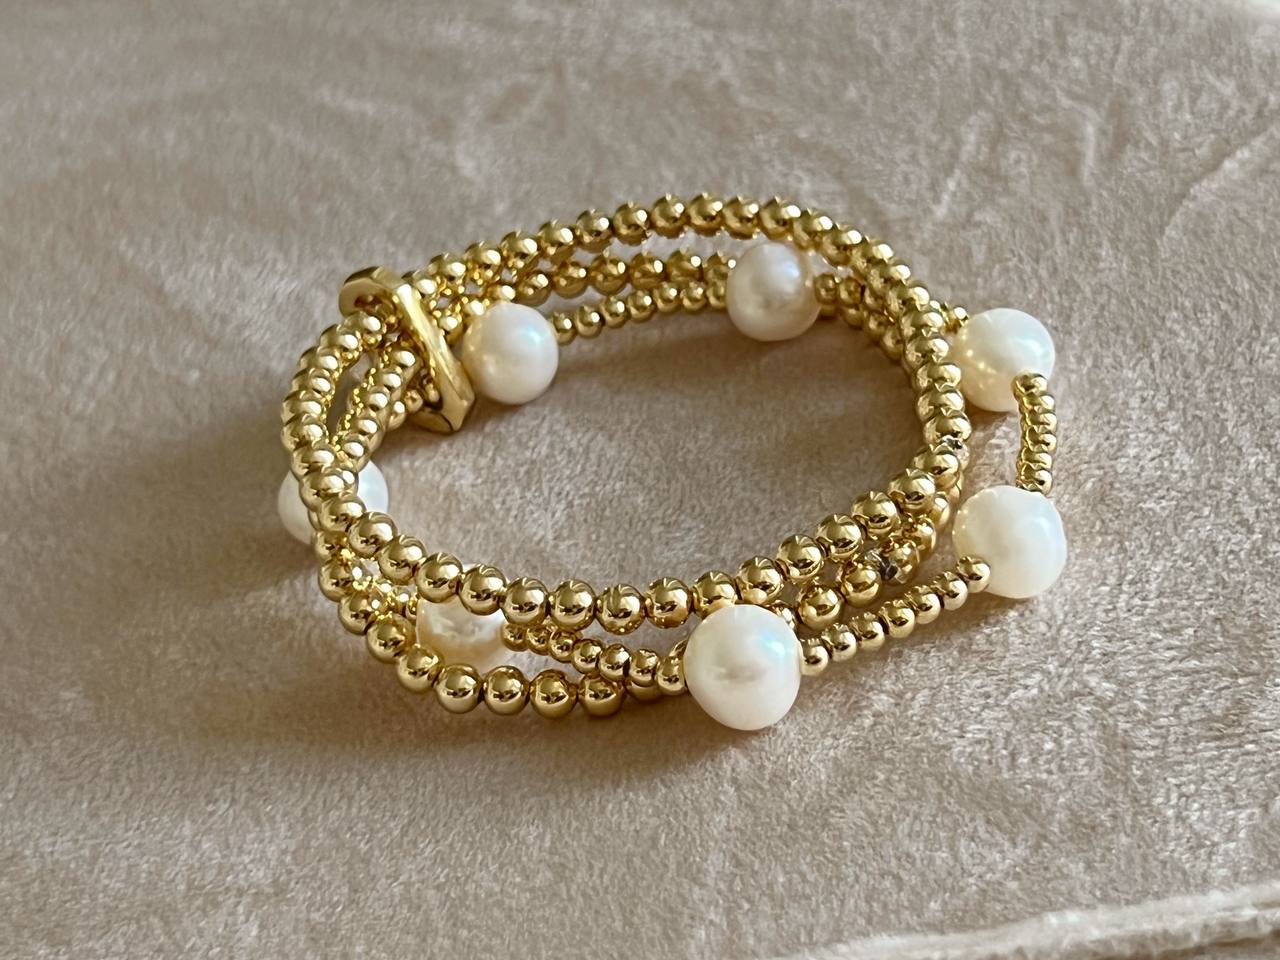 Bracelet of 3 with gold balls and pearls